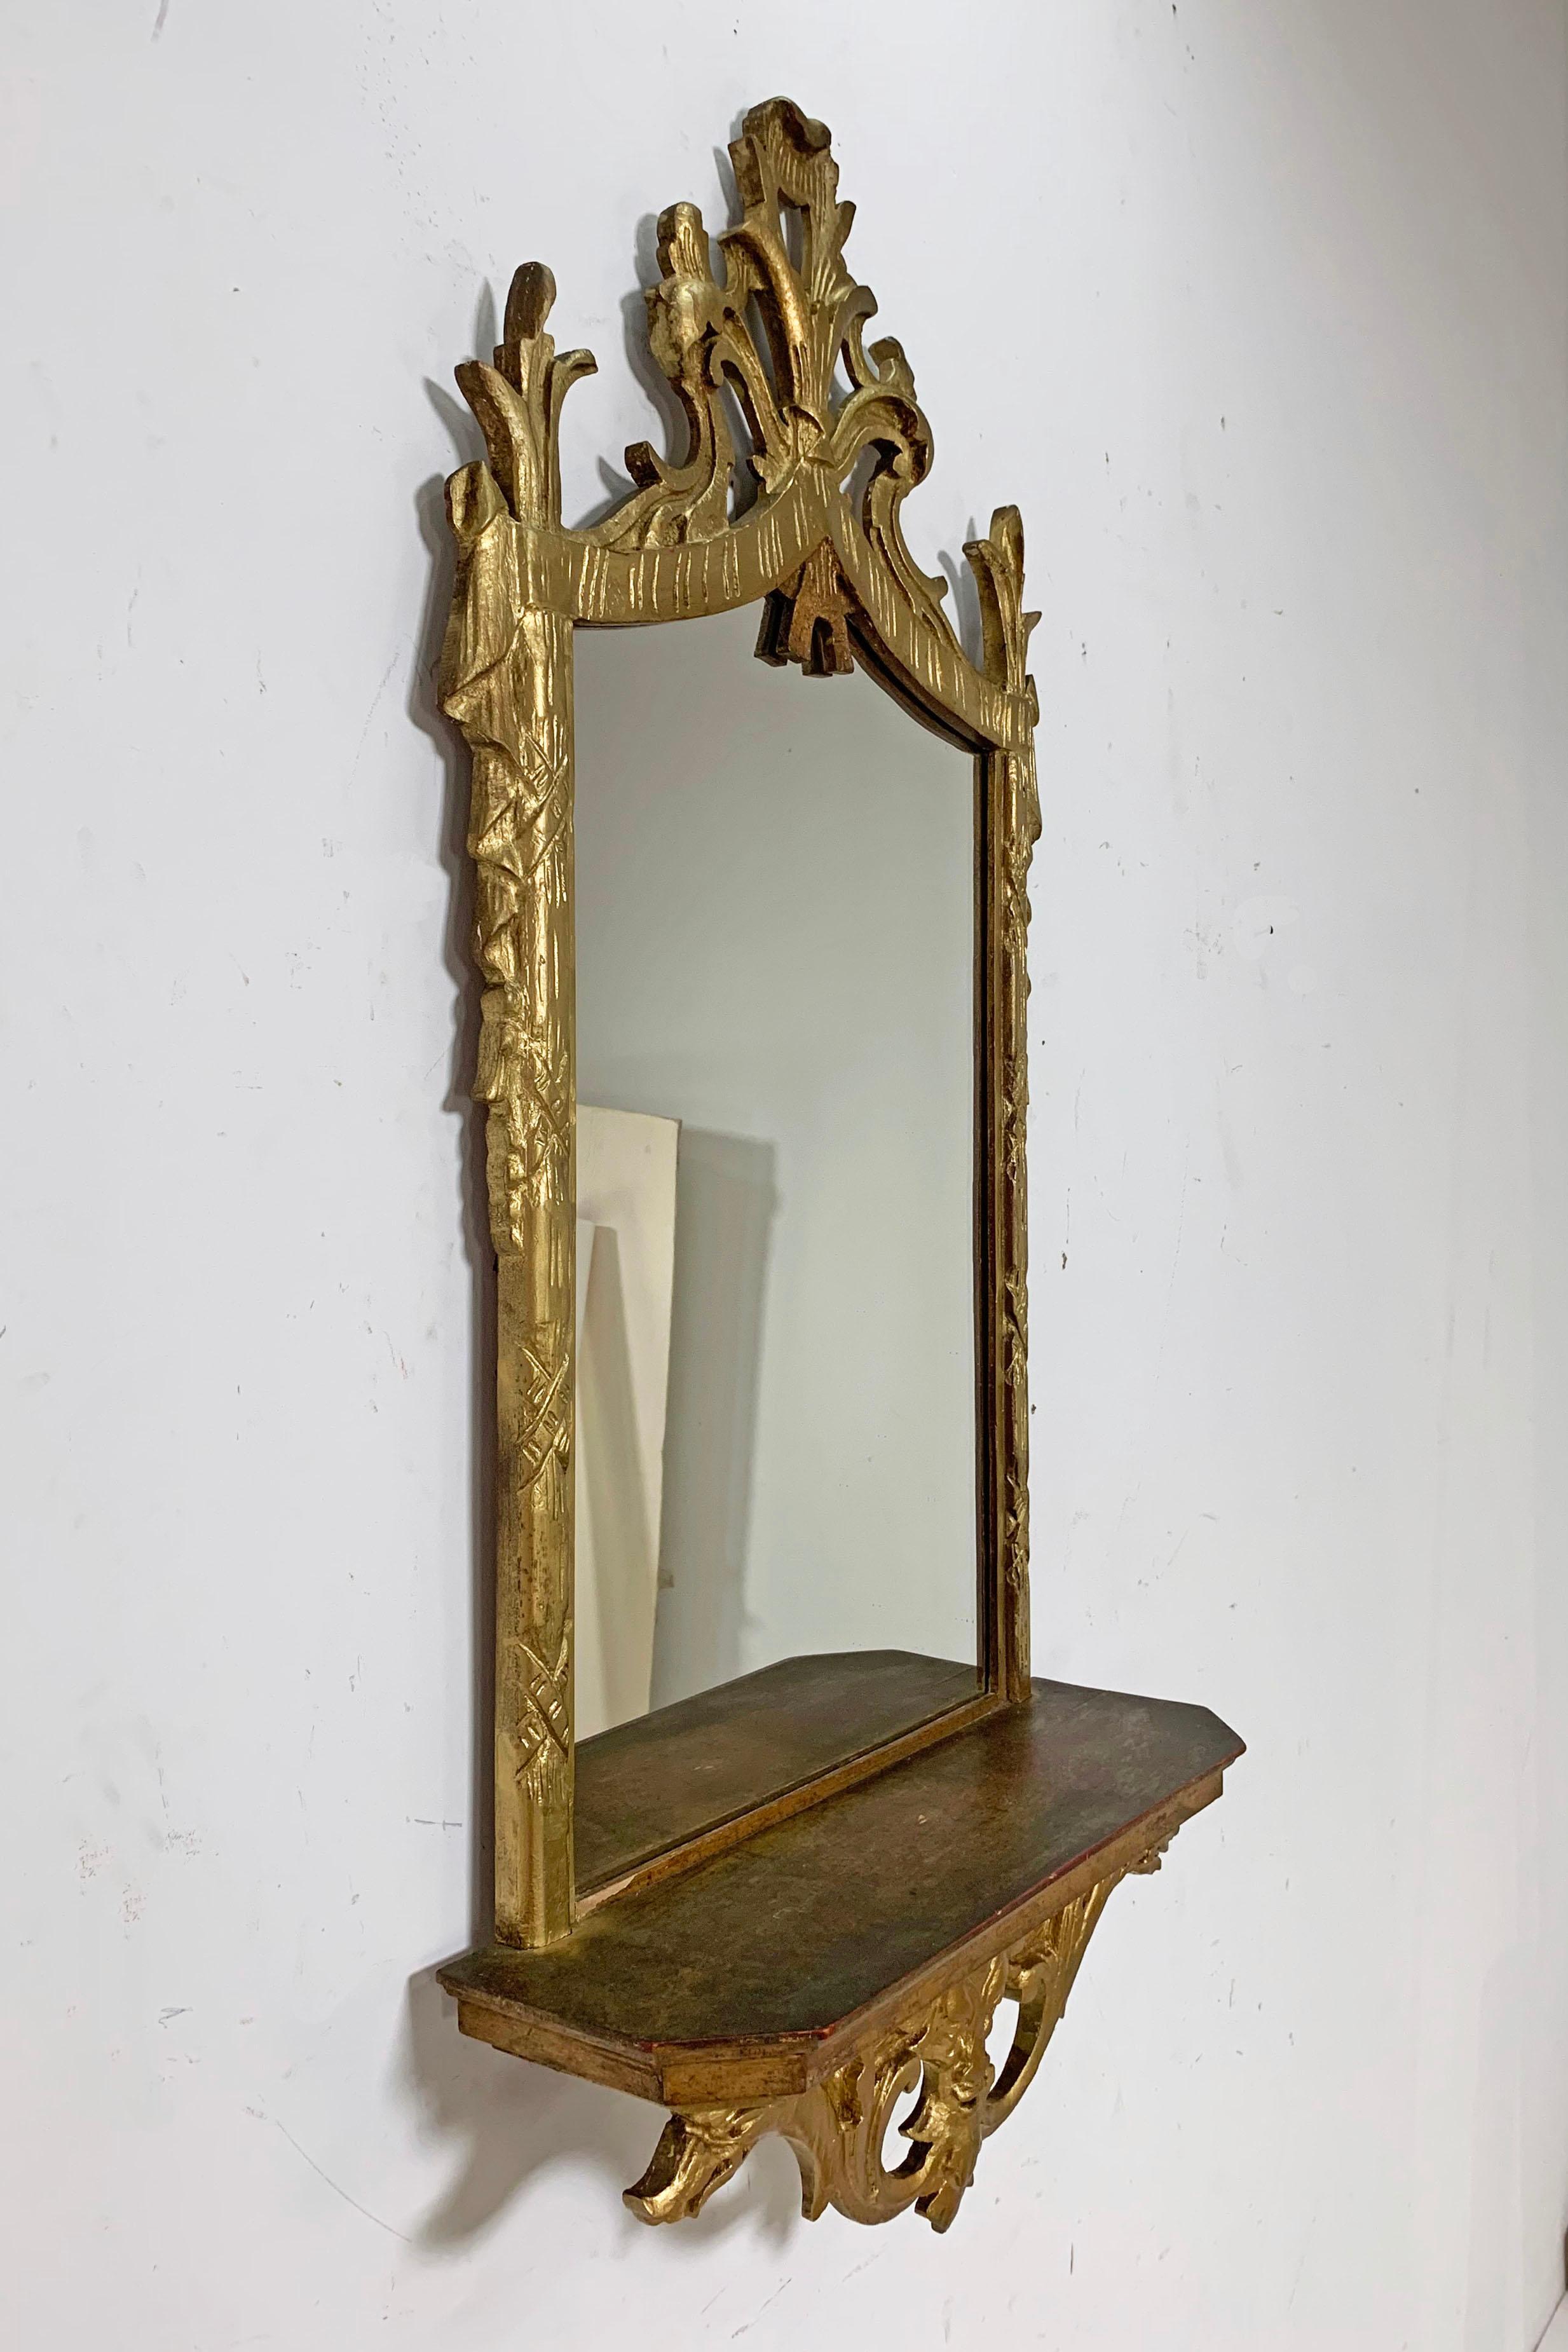 Italian carved giltwood mirror with under shelf, circa 1950s. Elaborate top garland carvings with side pedestals of Roman fasces, and images of Poseidon and dolphins to lower crest.